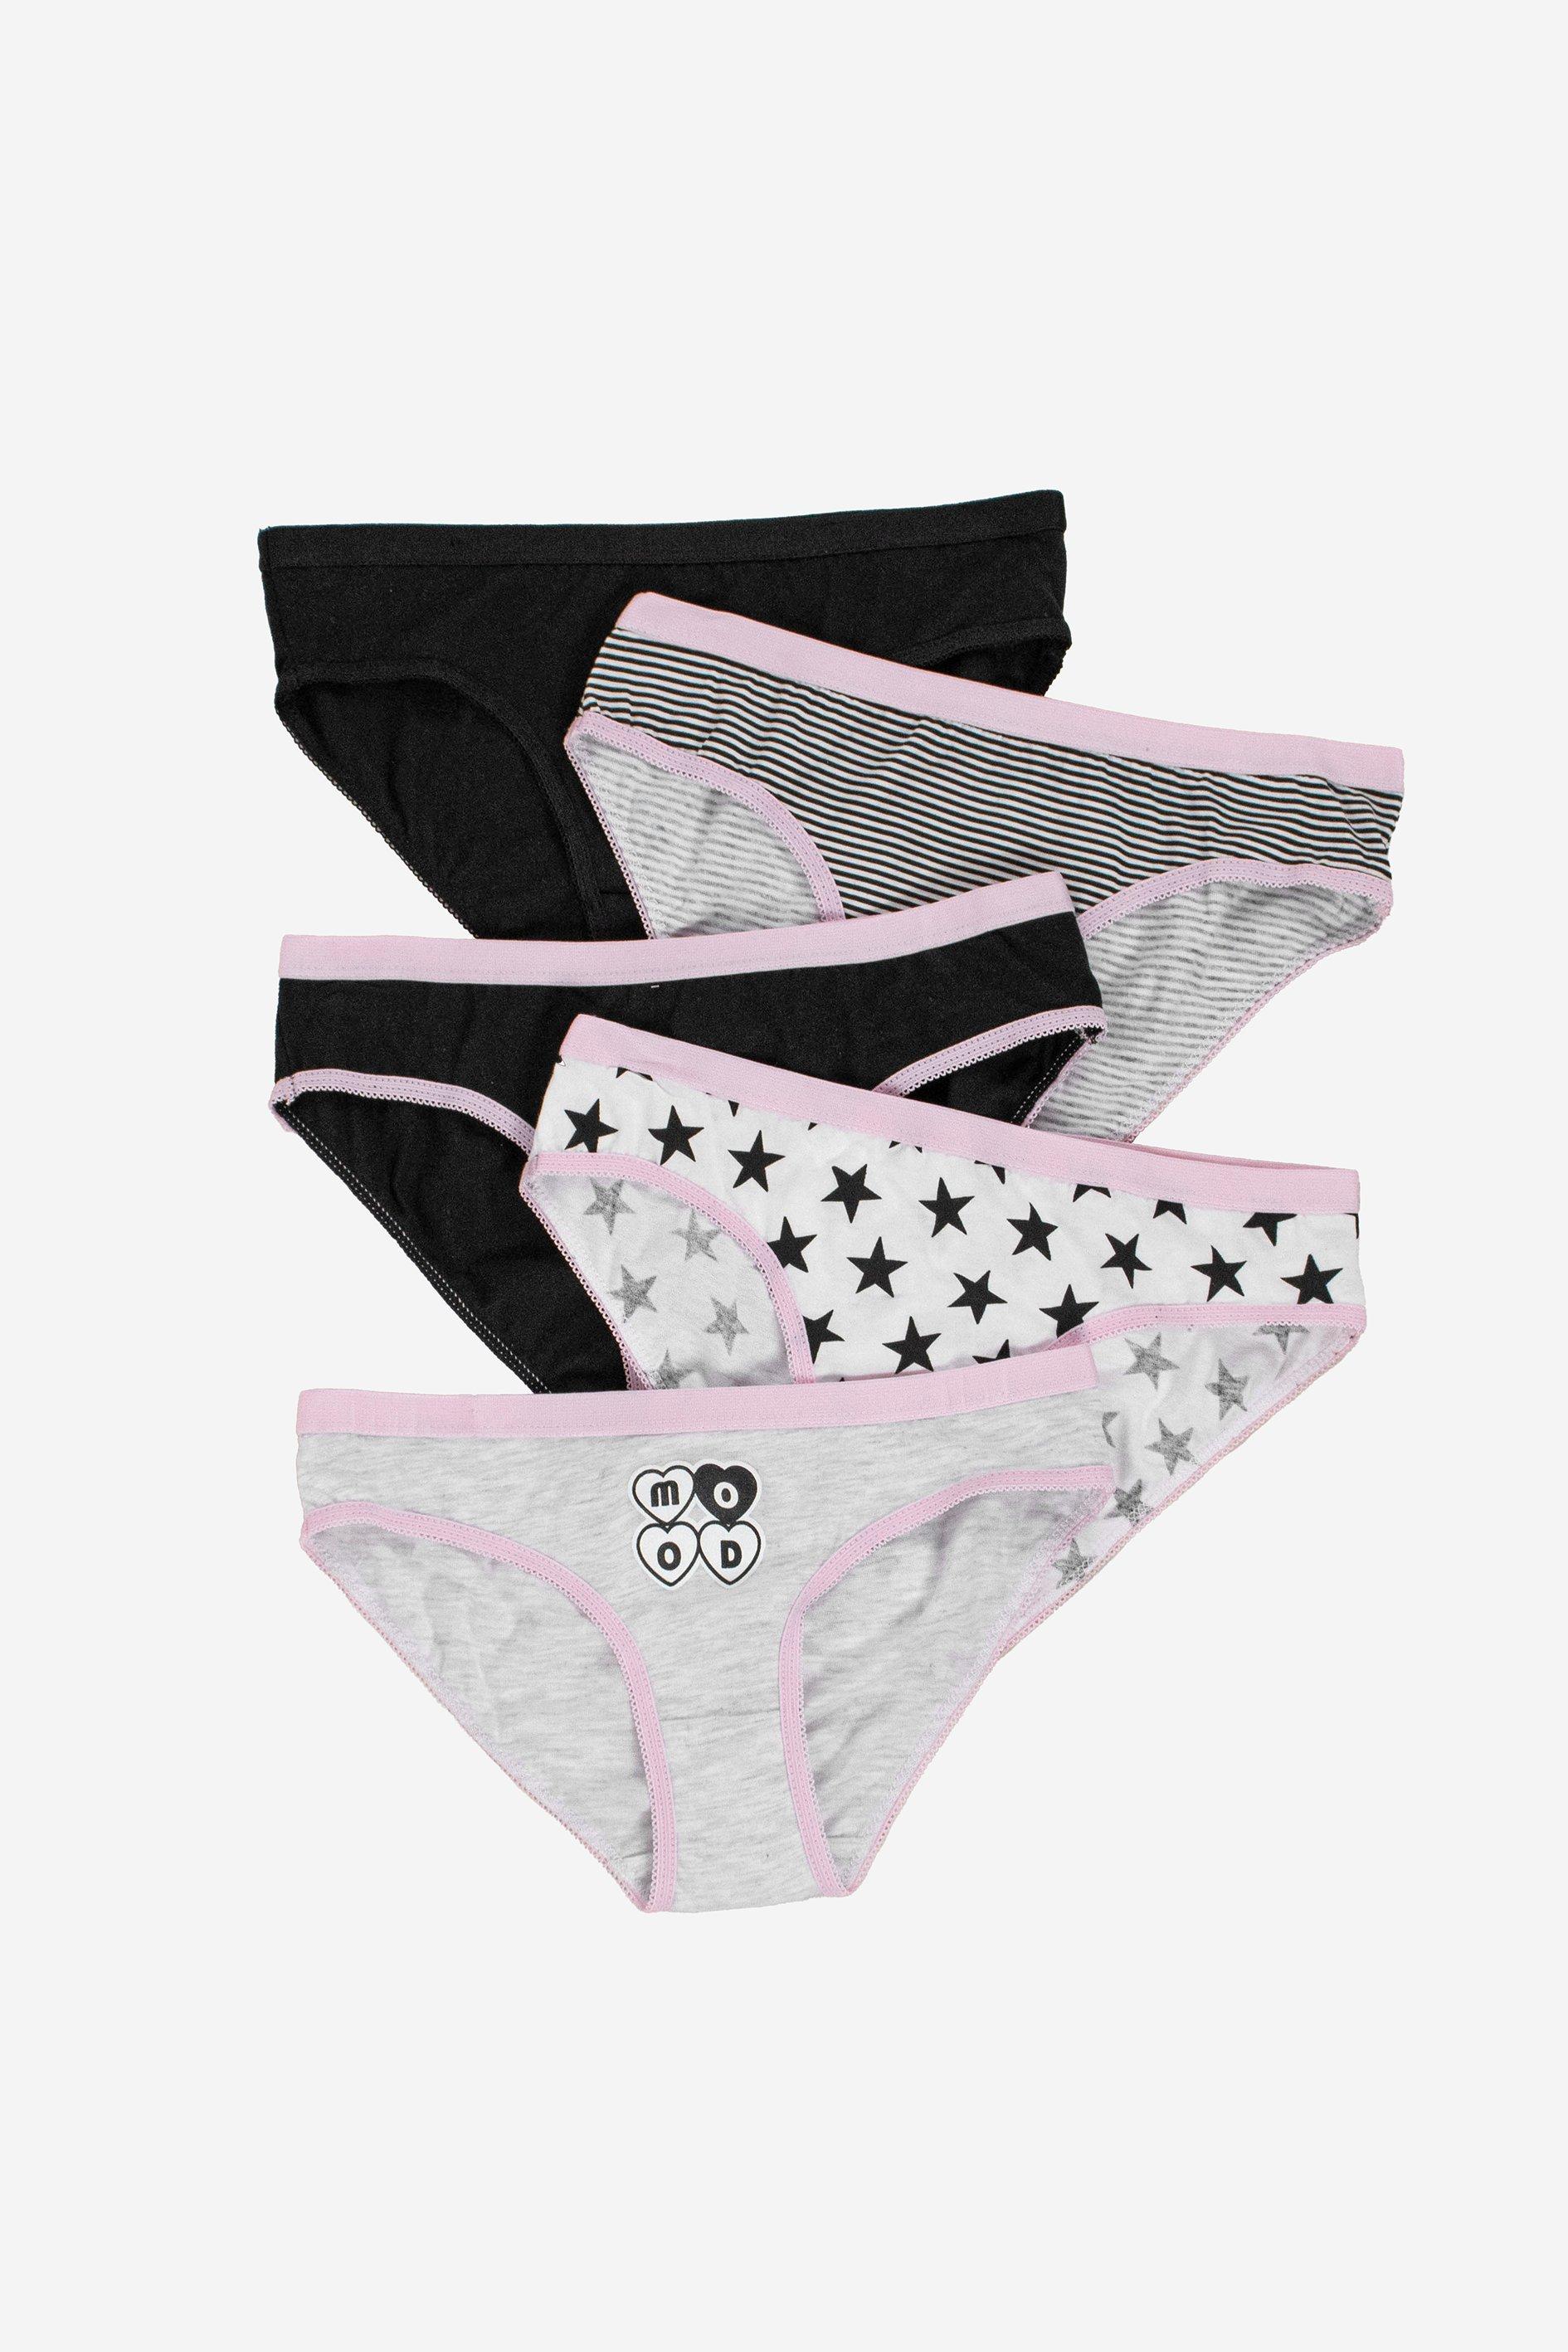 Shop Kids Underwear Panty 14 with great discounts and prices